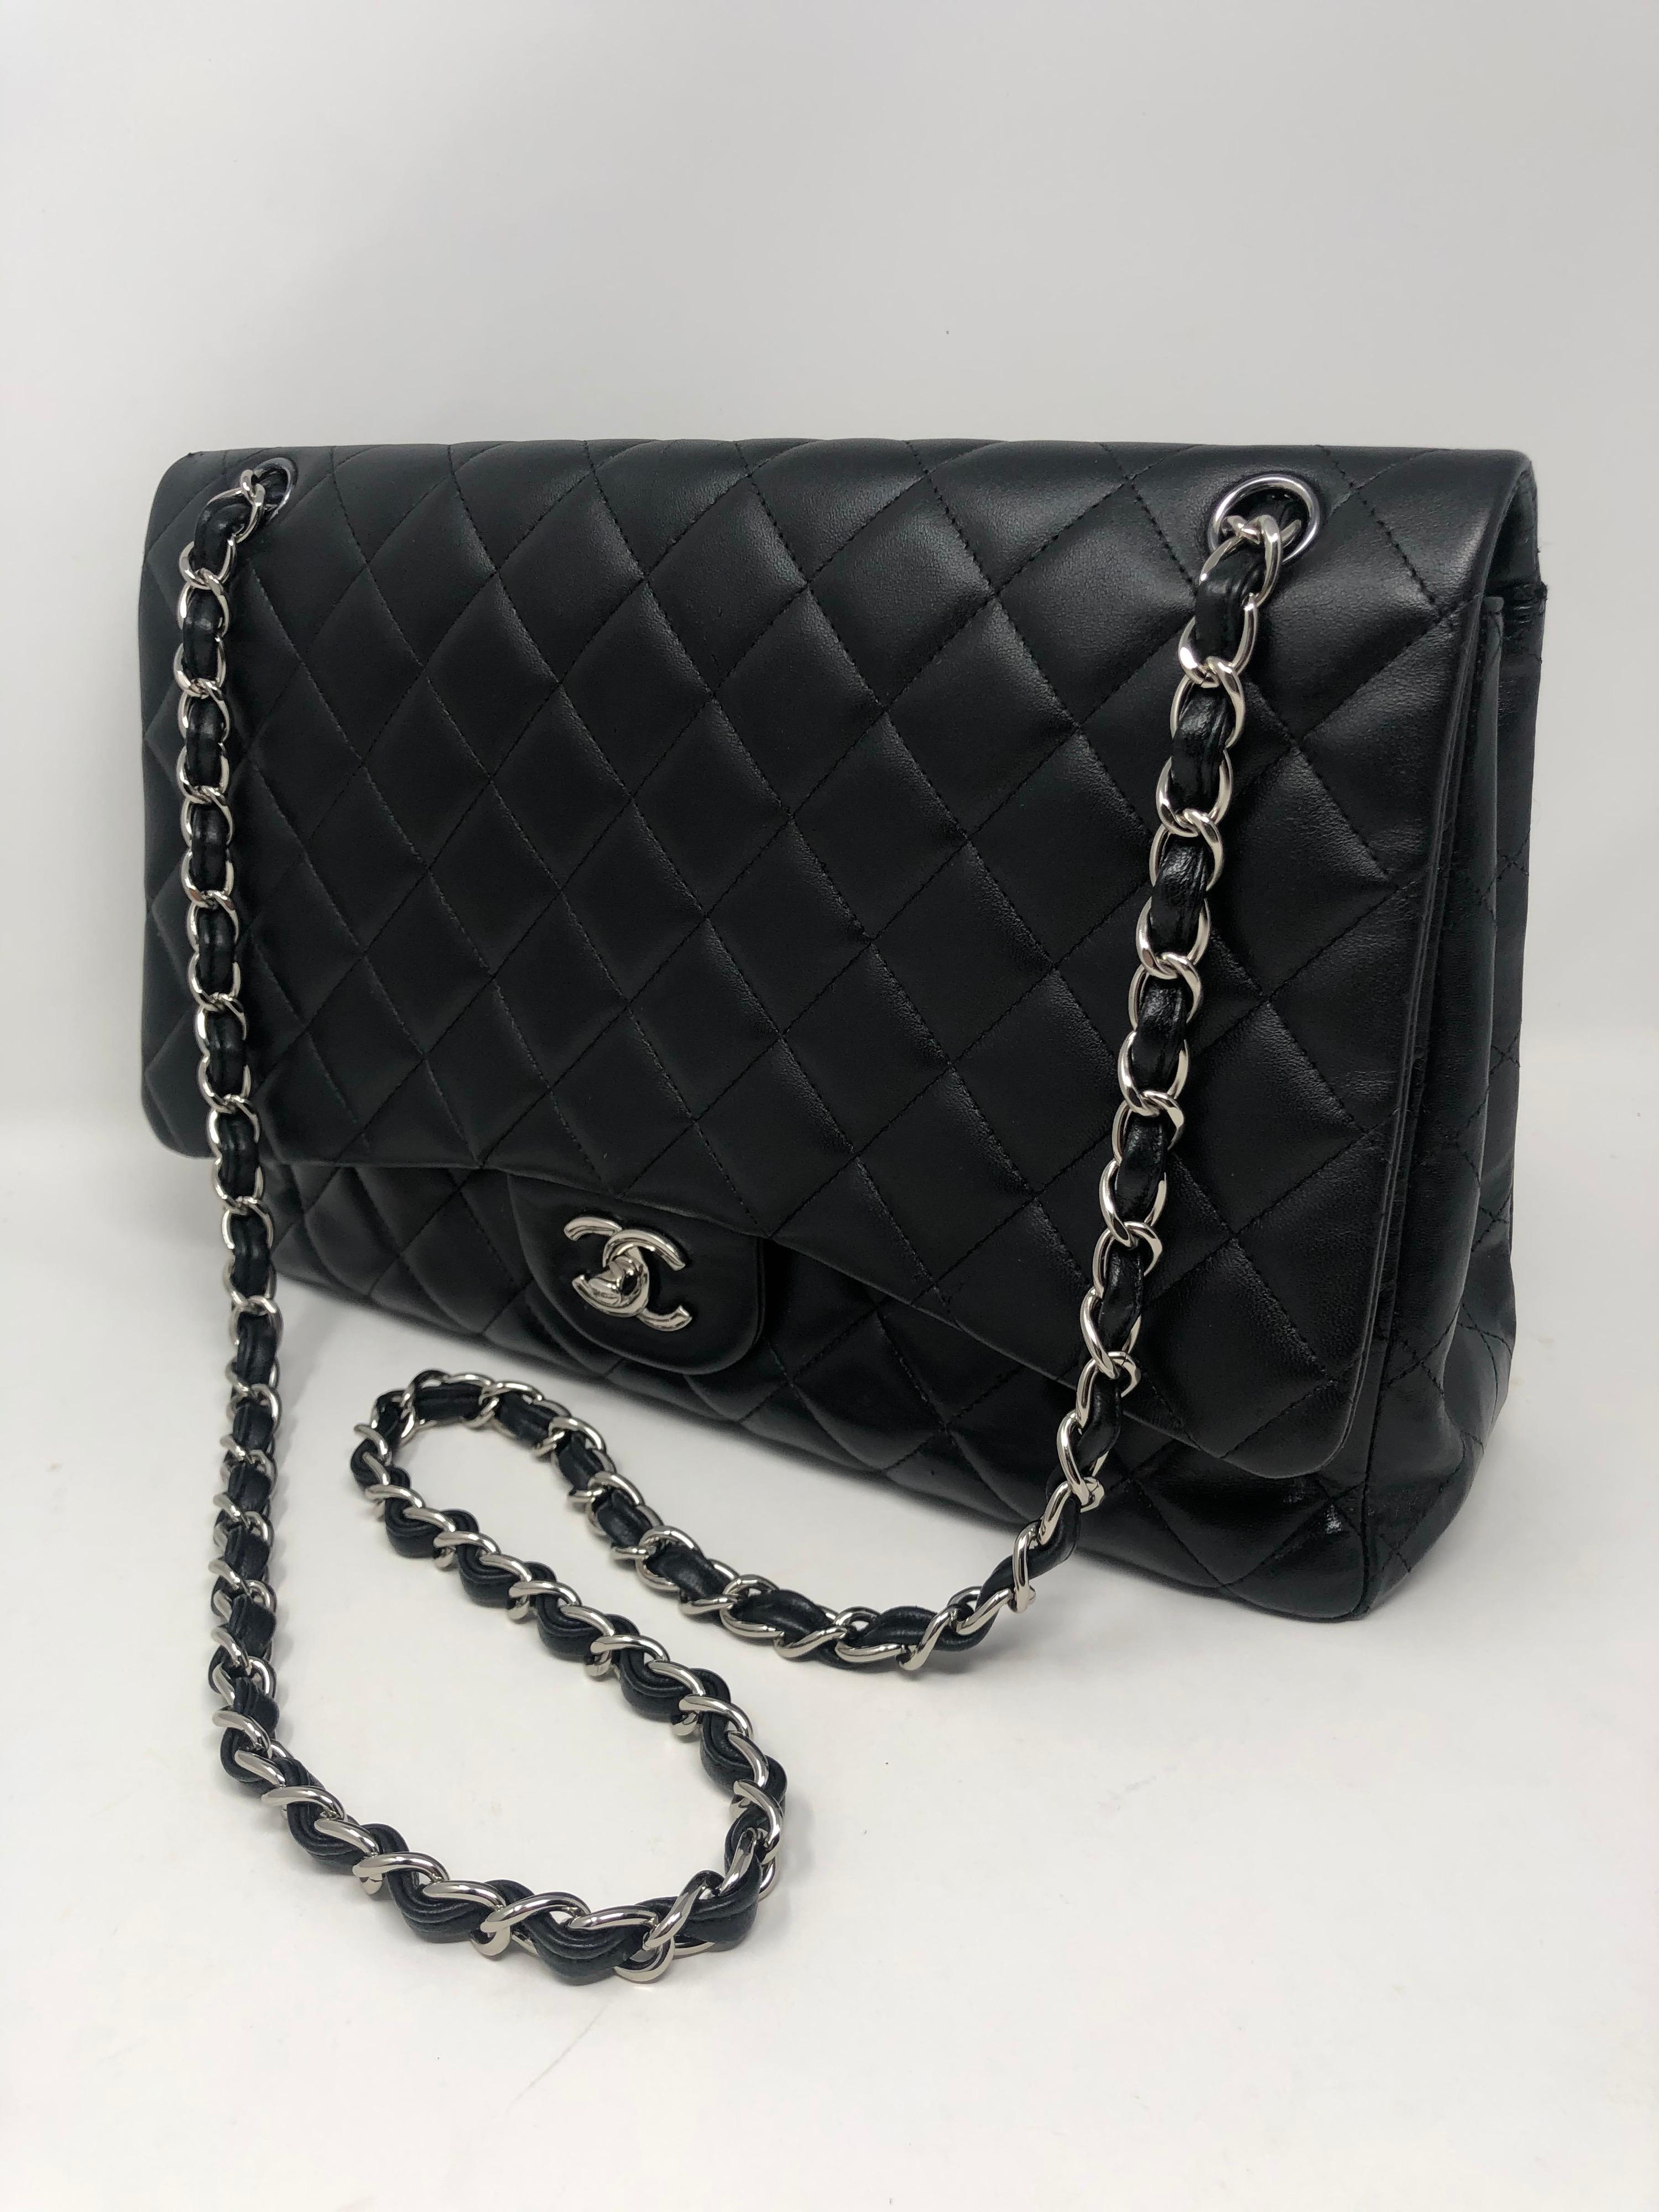 Chanel Black Maxi Single Flap Bag. Bag was originally silver color and was recently redyed black. The interior is still silver and in good condition. Please note the black is not the original color. The bag has been be redyed by a leather